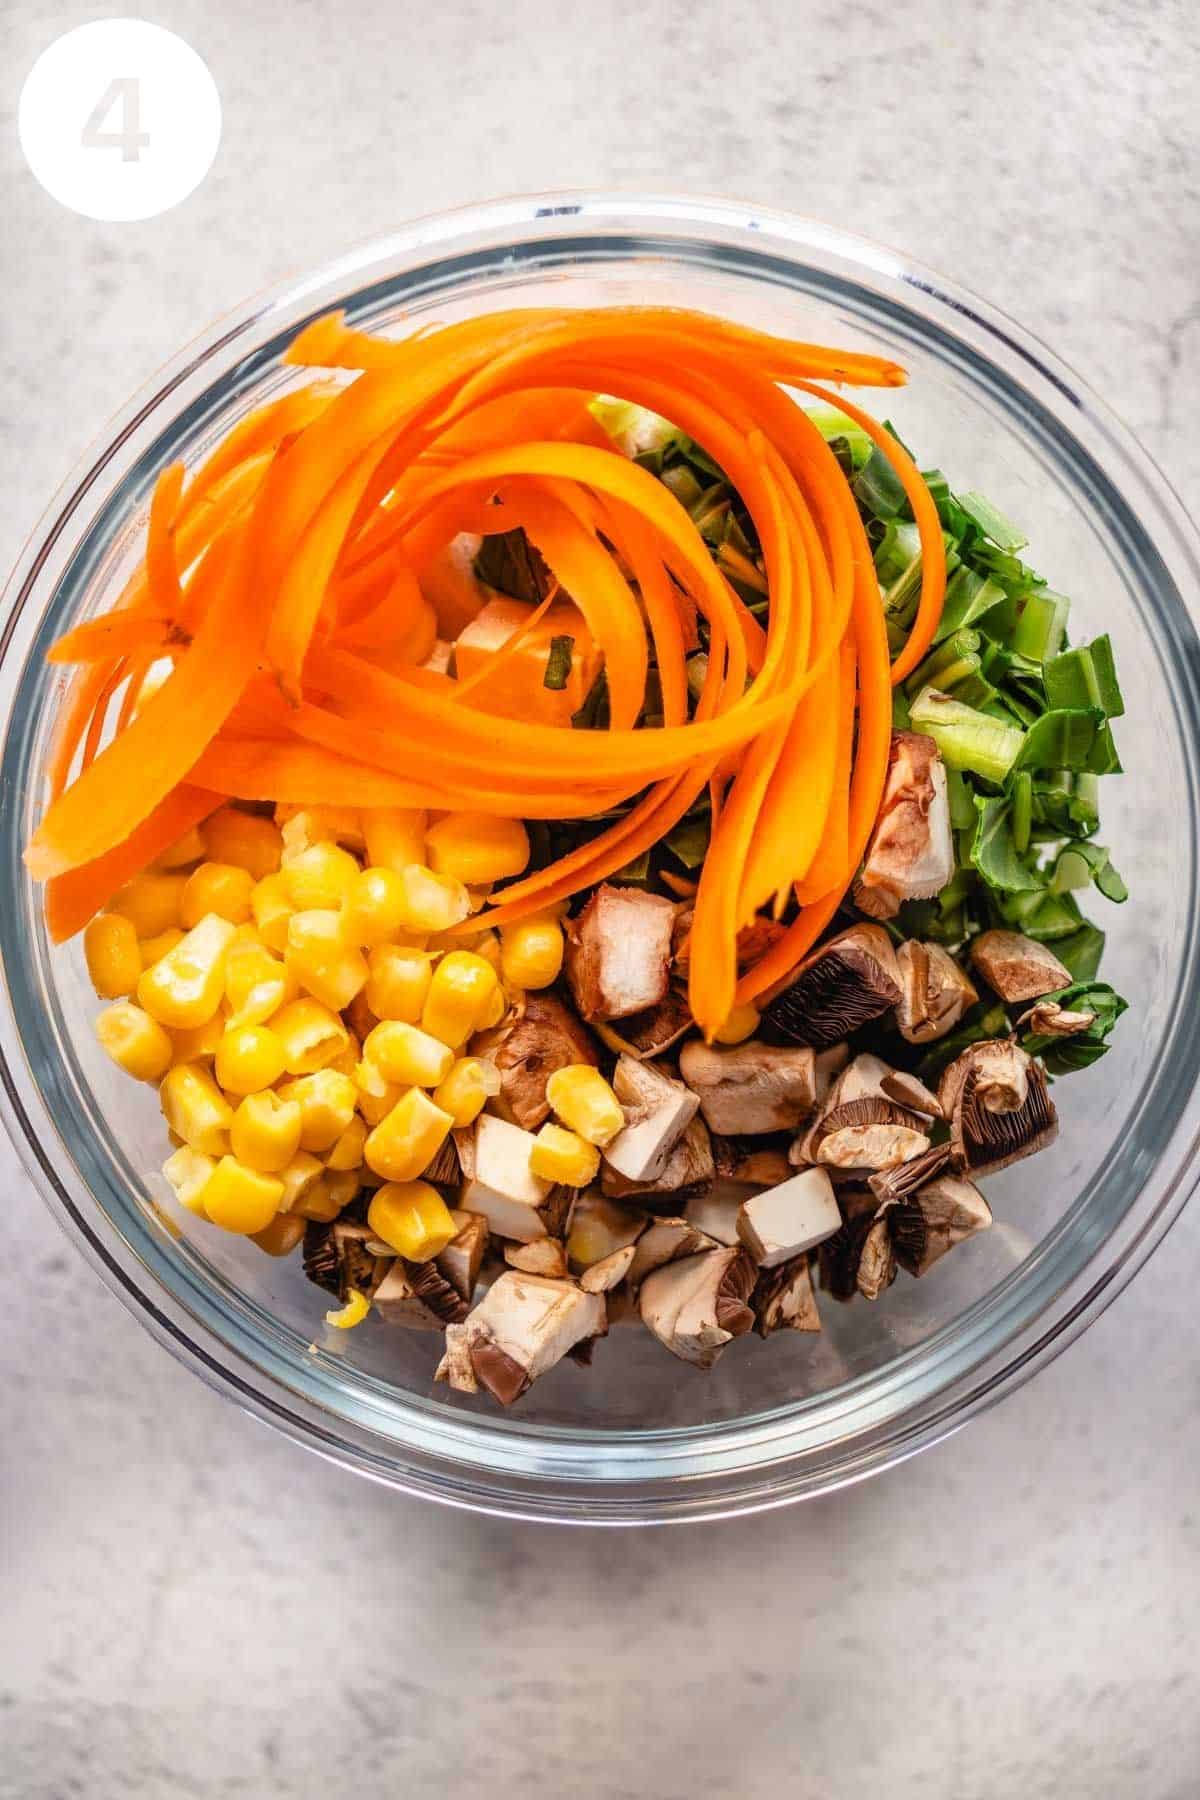 Carrot, mushrooms, corn, and bok choy in a glass meal prep container.